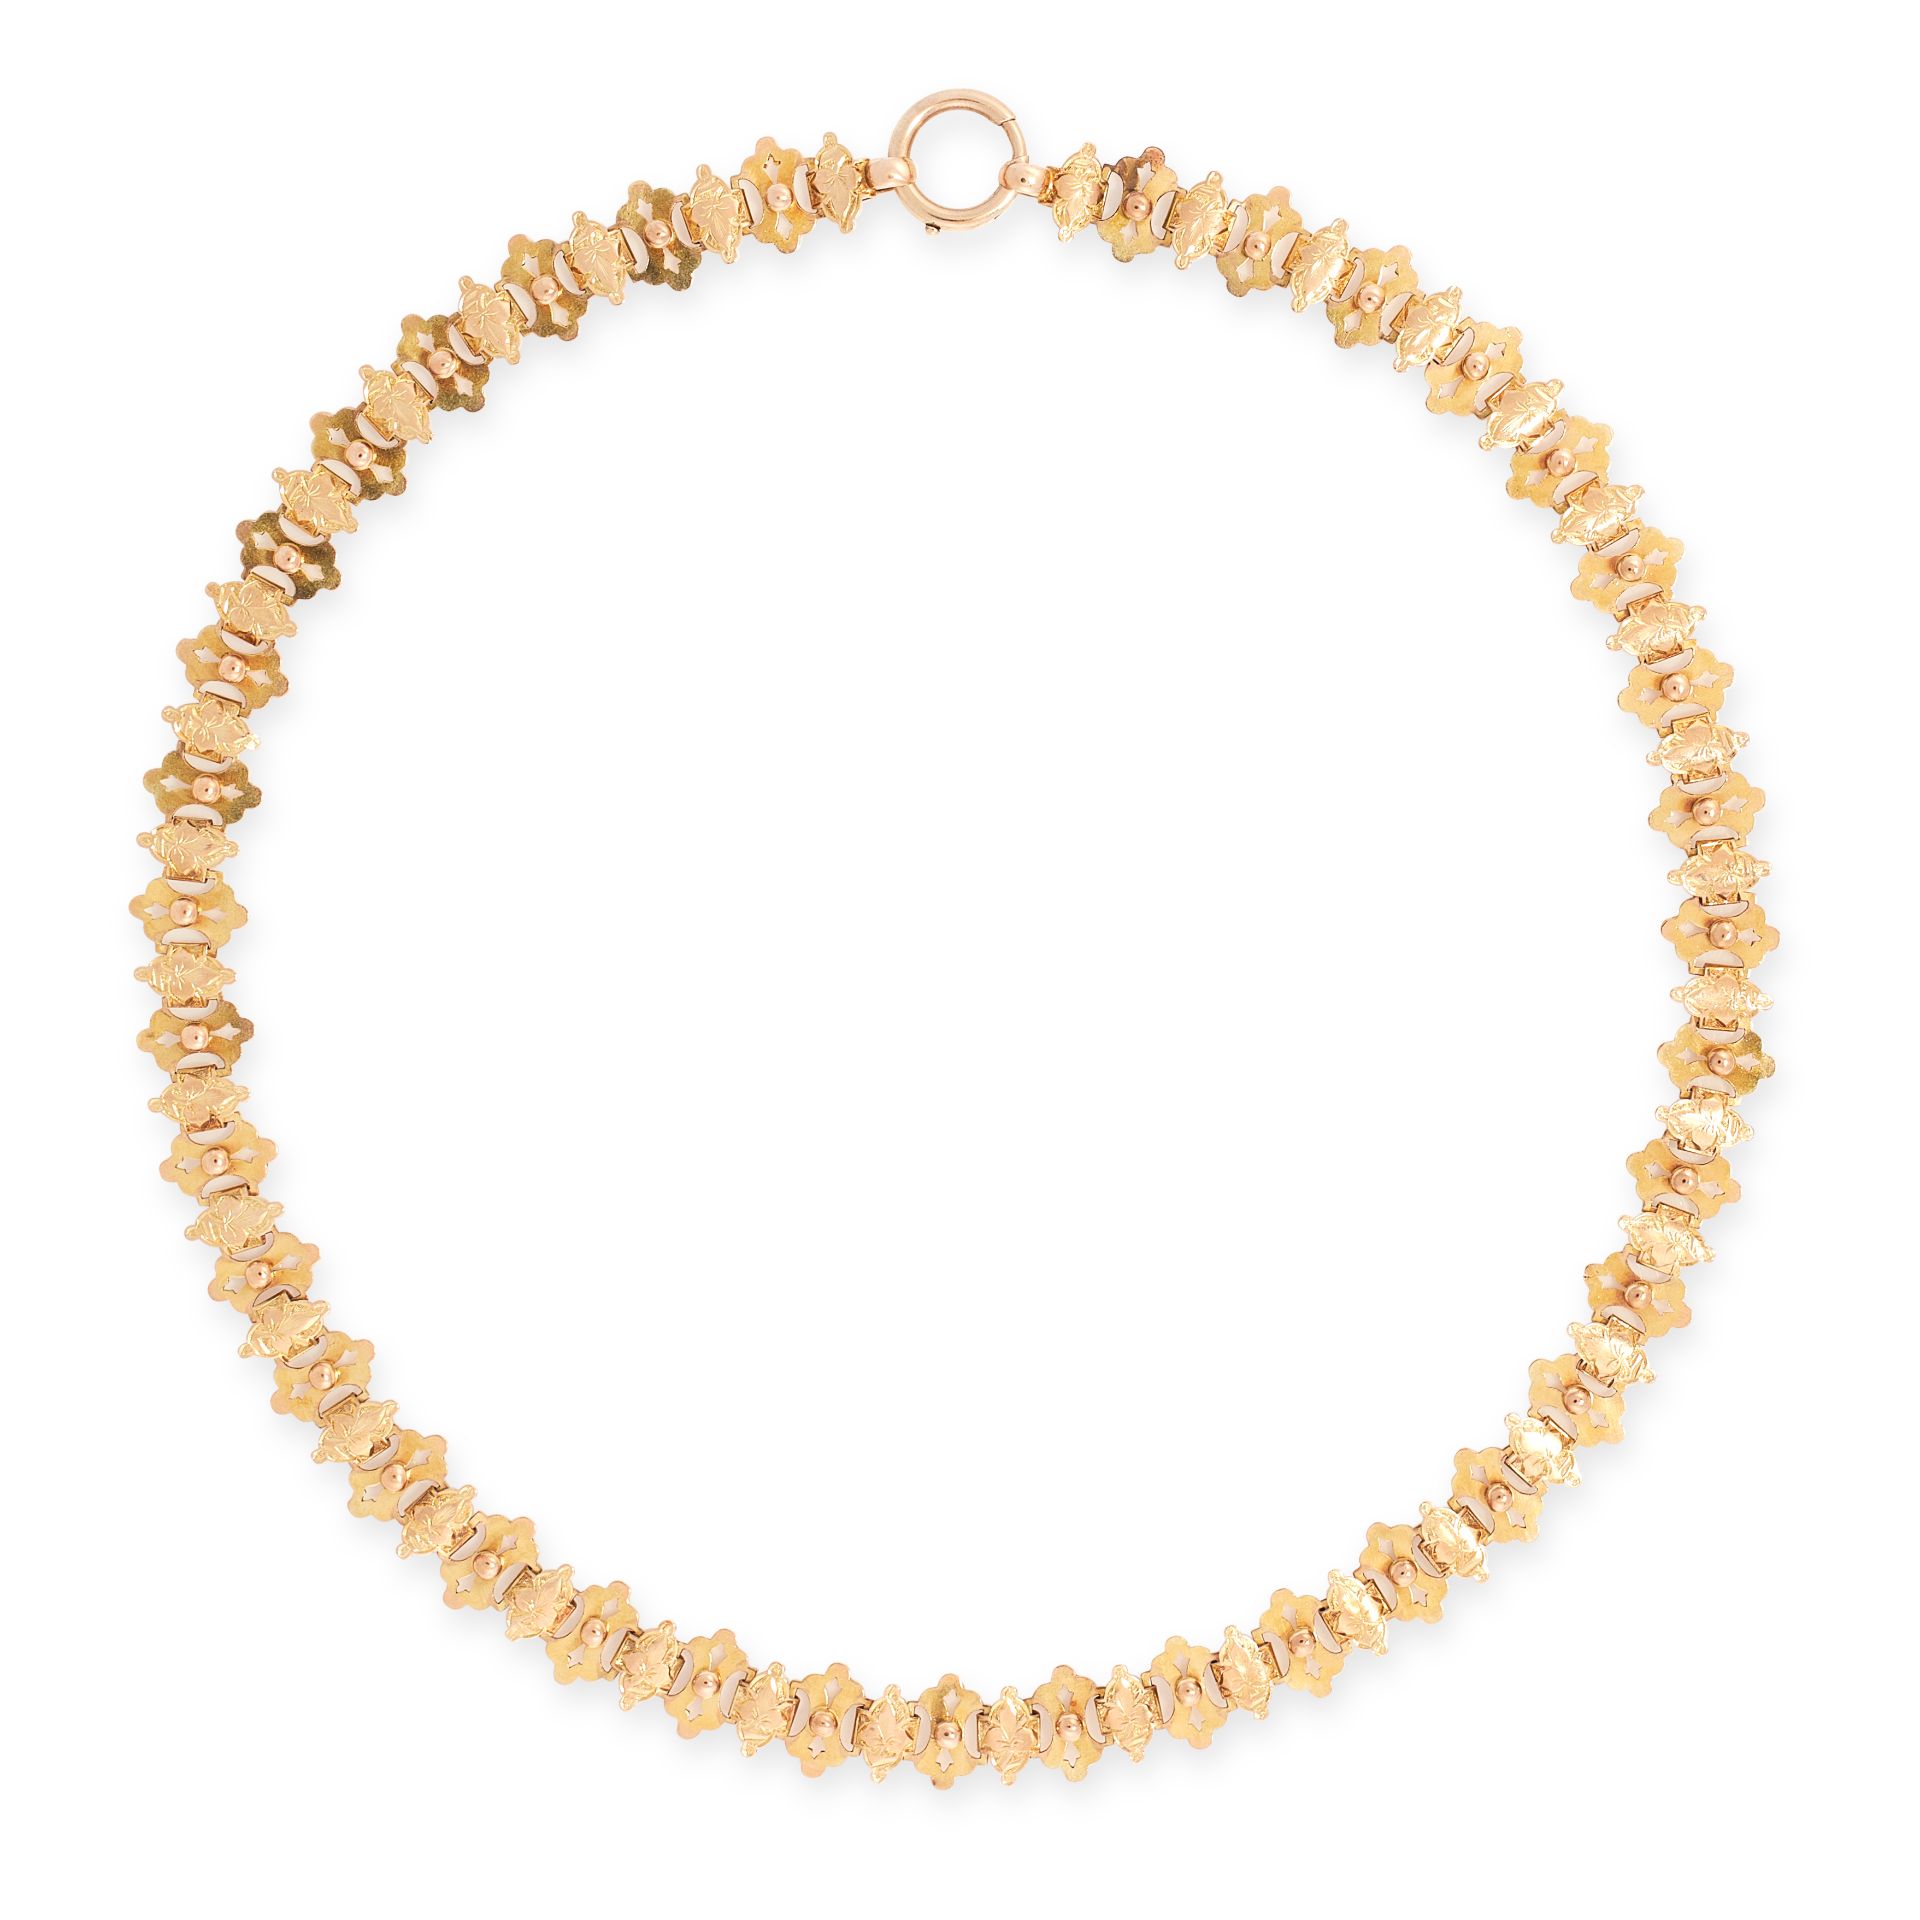 AN ANTIQUE COLLAR NECKLACE in yellow gold, set with alternating engraved foliate links and pierced